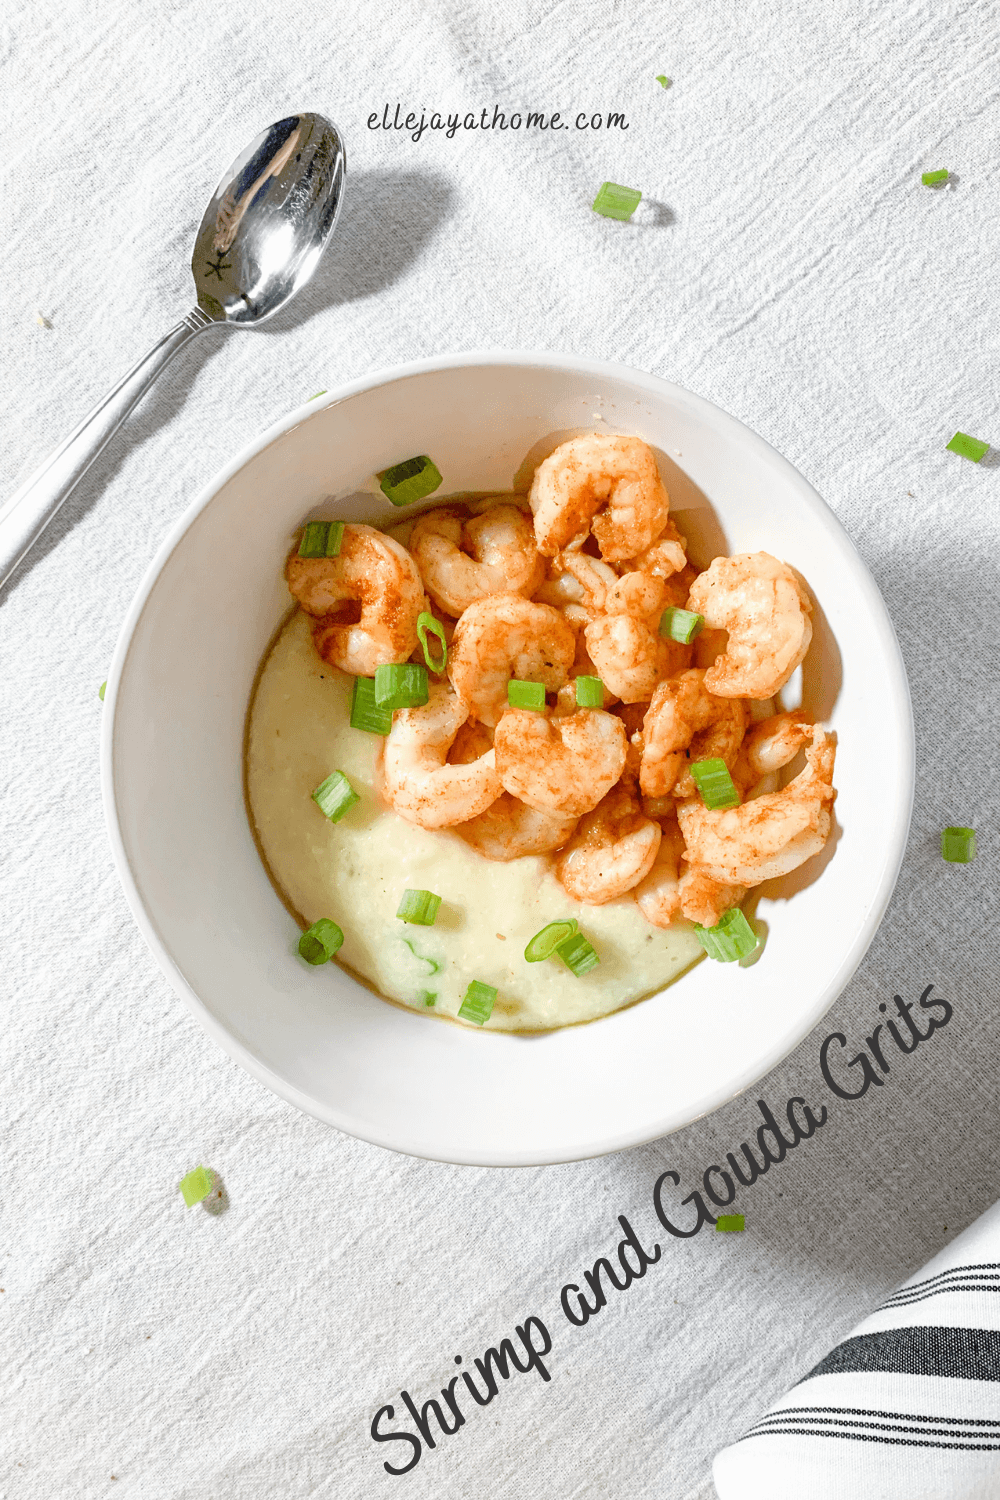 Shrimp and Gouda Grits are a Great, Quick, Easy Weeknight Dinner